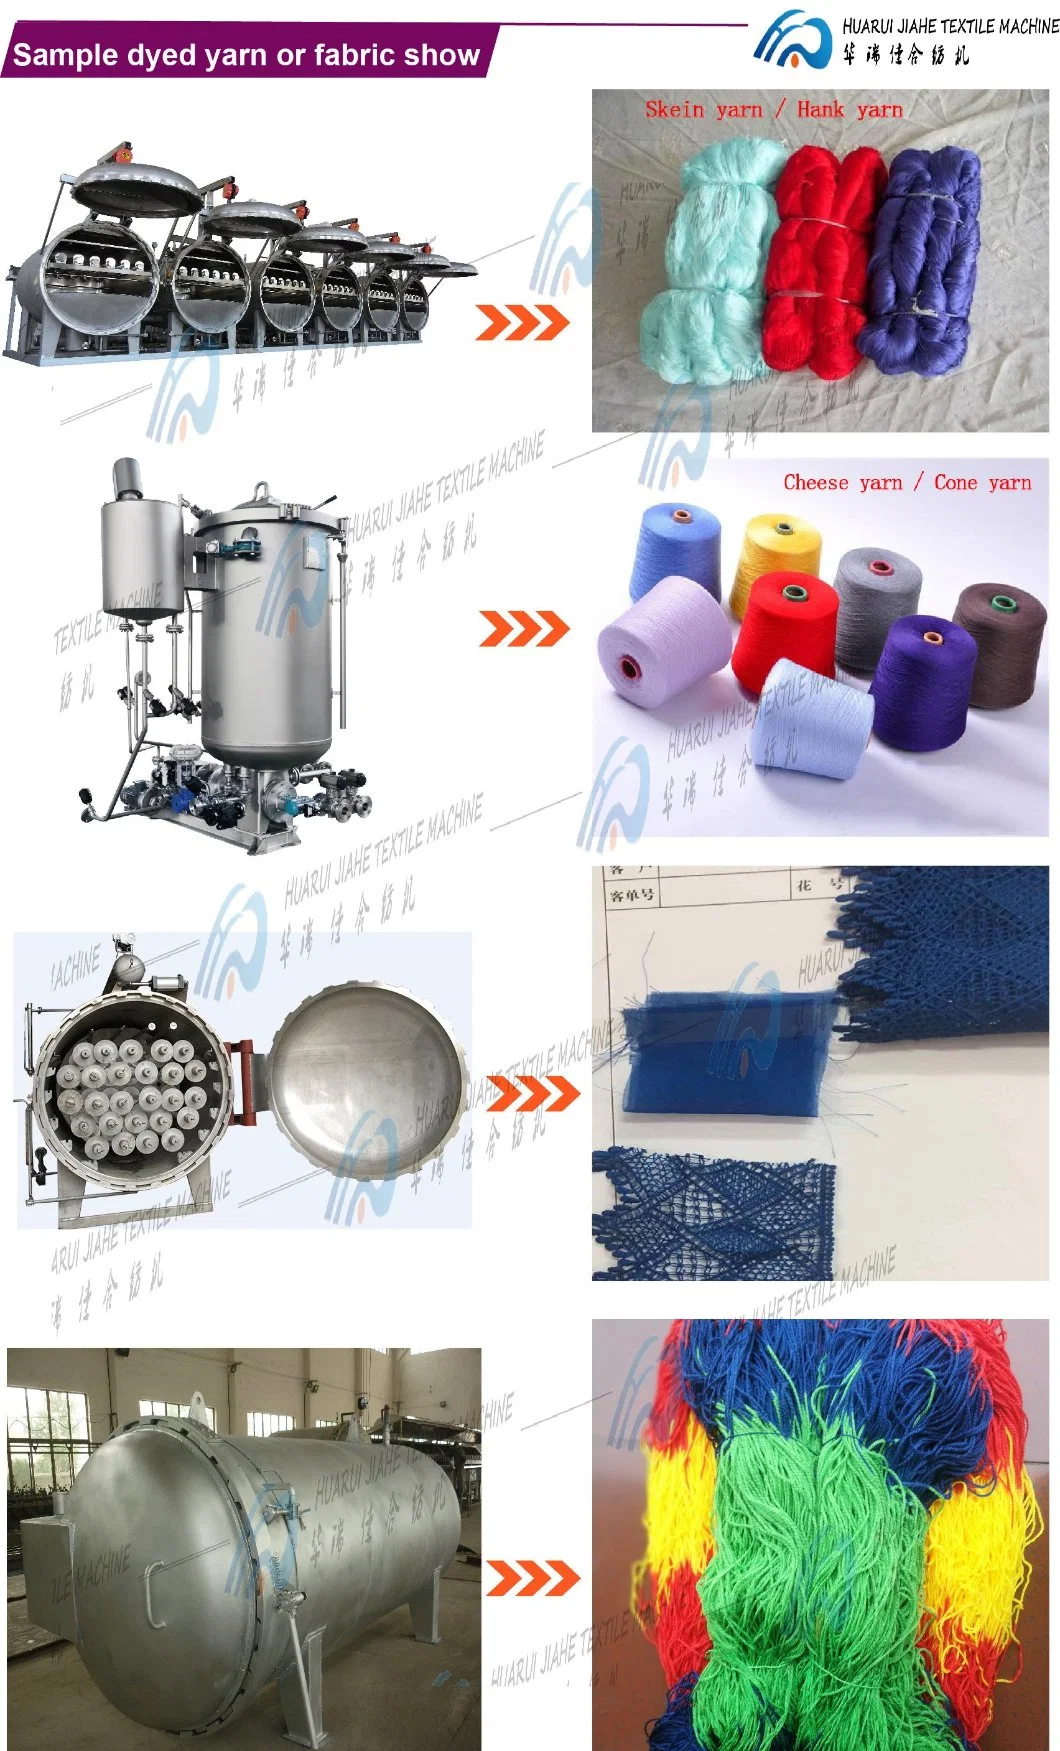 Beam Type Dyeing and Printing Fabric Machines of Cotton, Polyester, Flax and Blended Fabric. Dye Jigger Widely All Kinds of Fiber and Blended Products